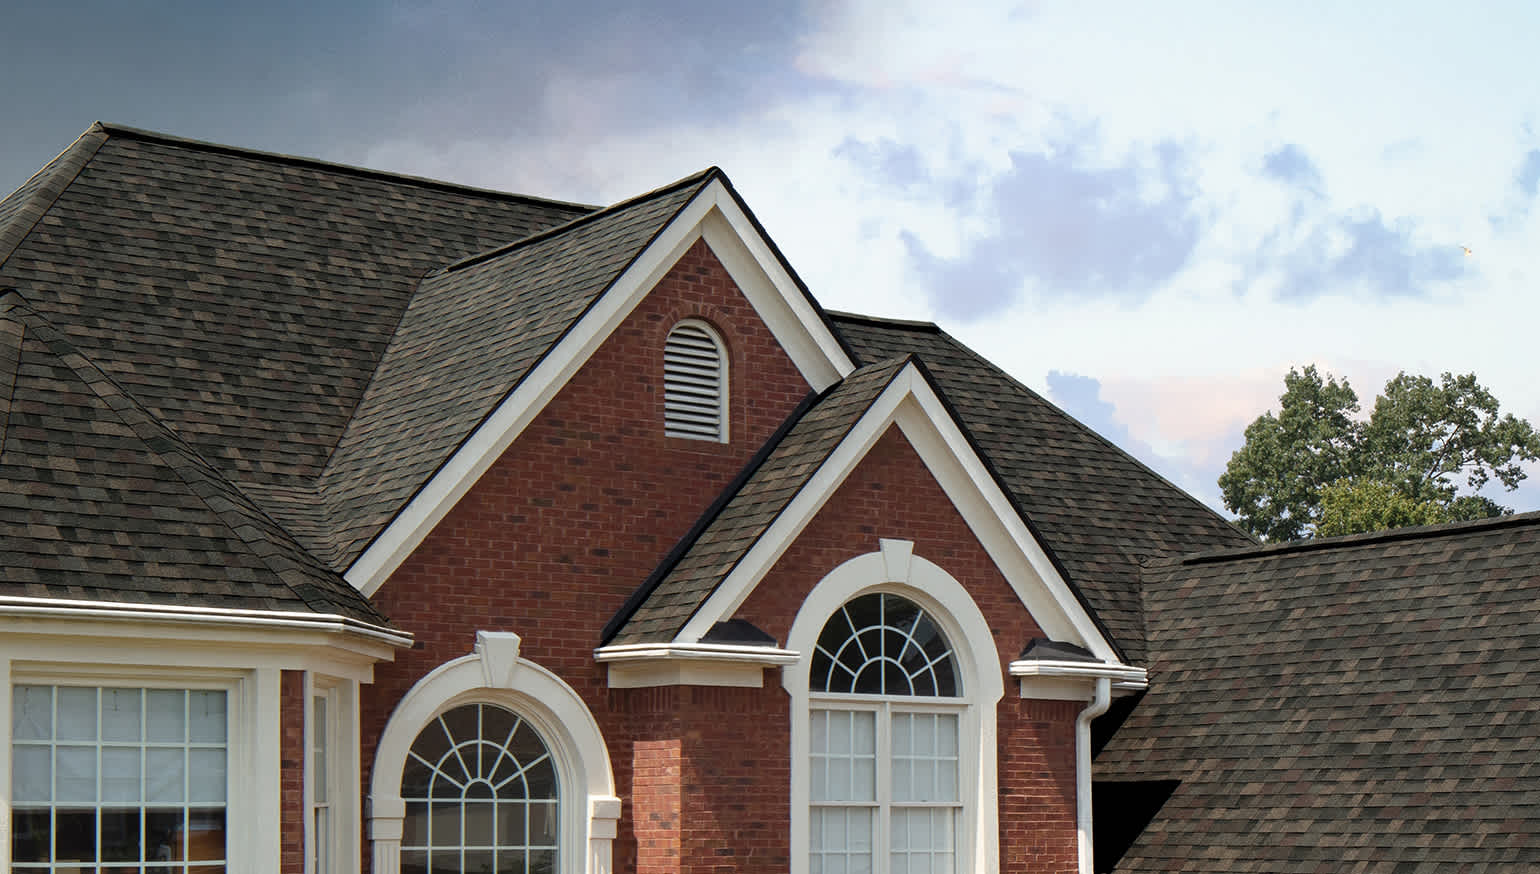 The Best Owens Corning Shingles Guide 2022 - Sol Vista Roofing